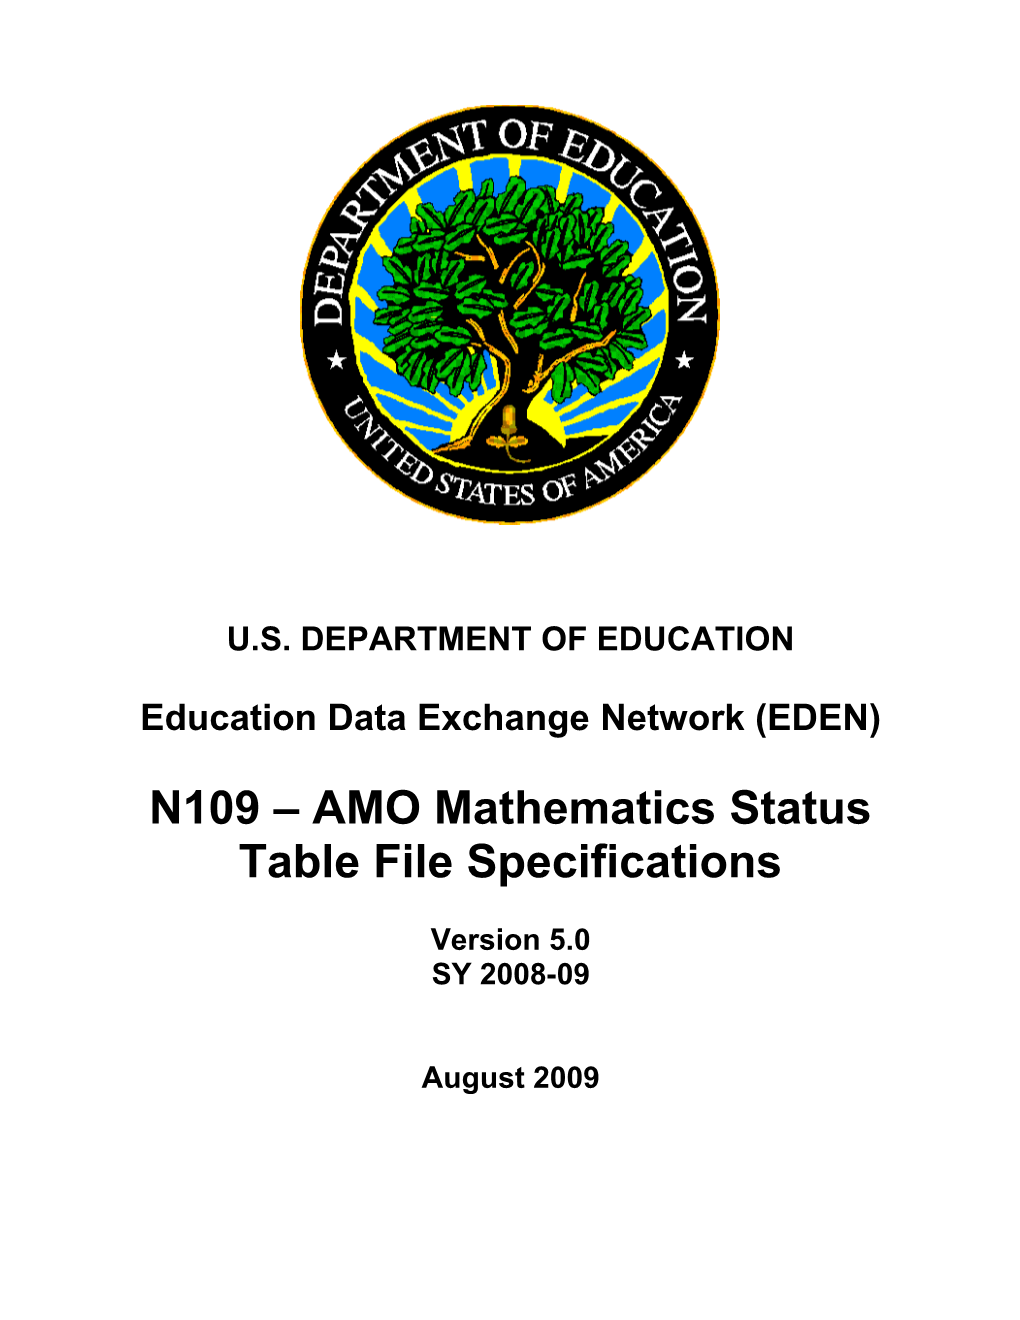 N109 AMO Mathematics Status Table File Specifications (MS Word)